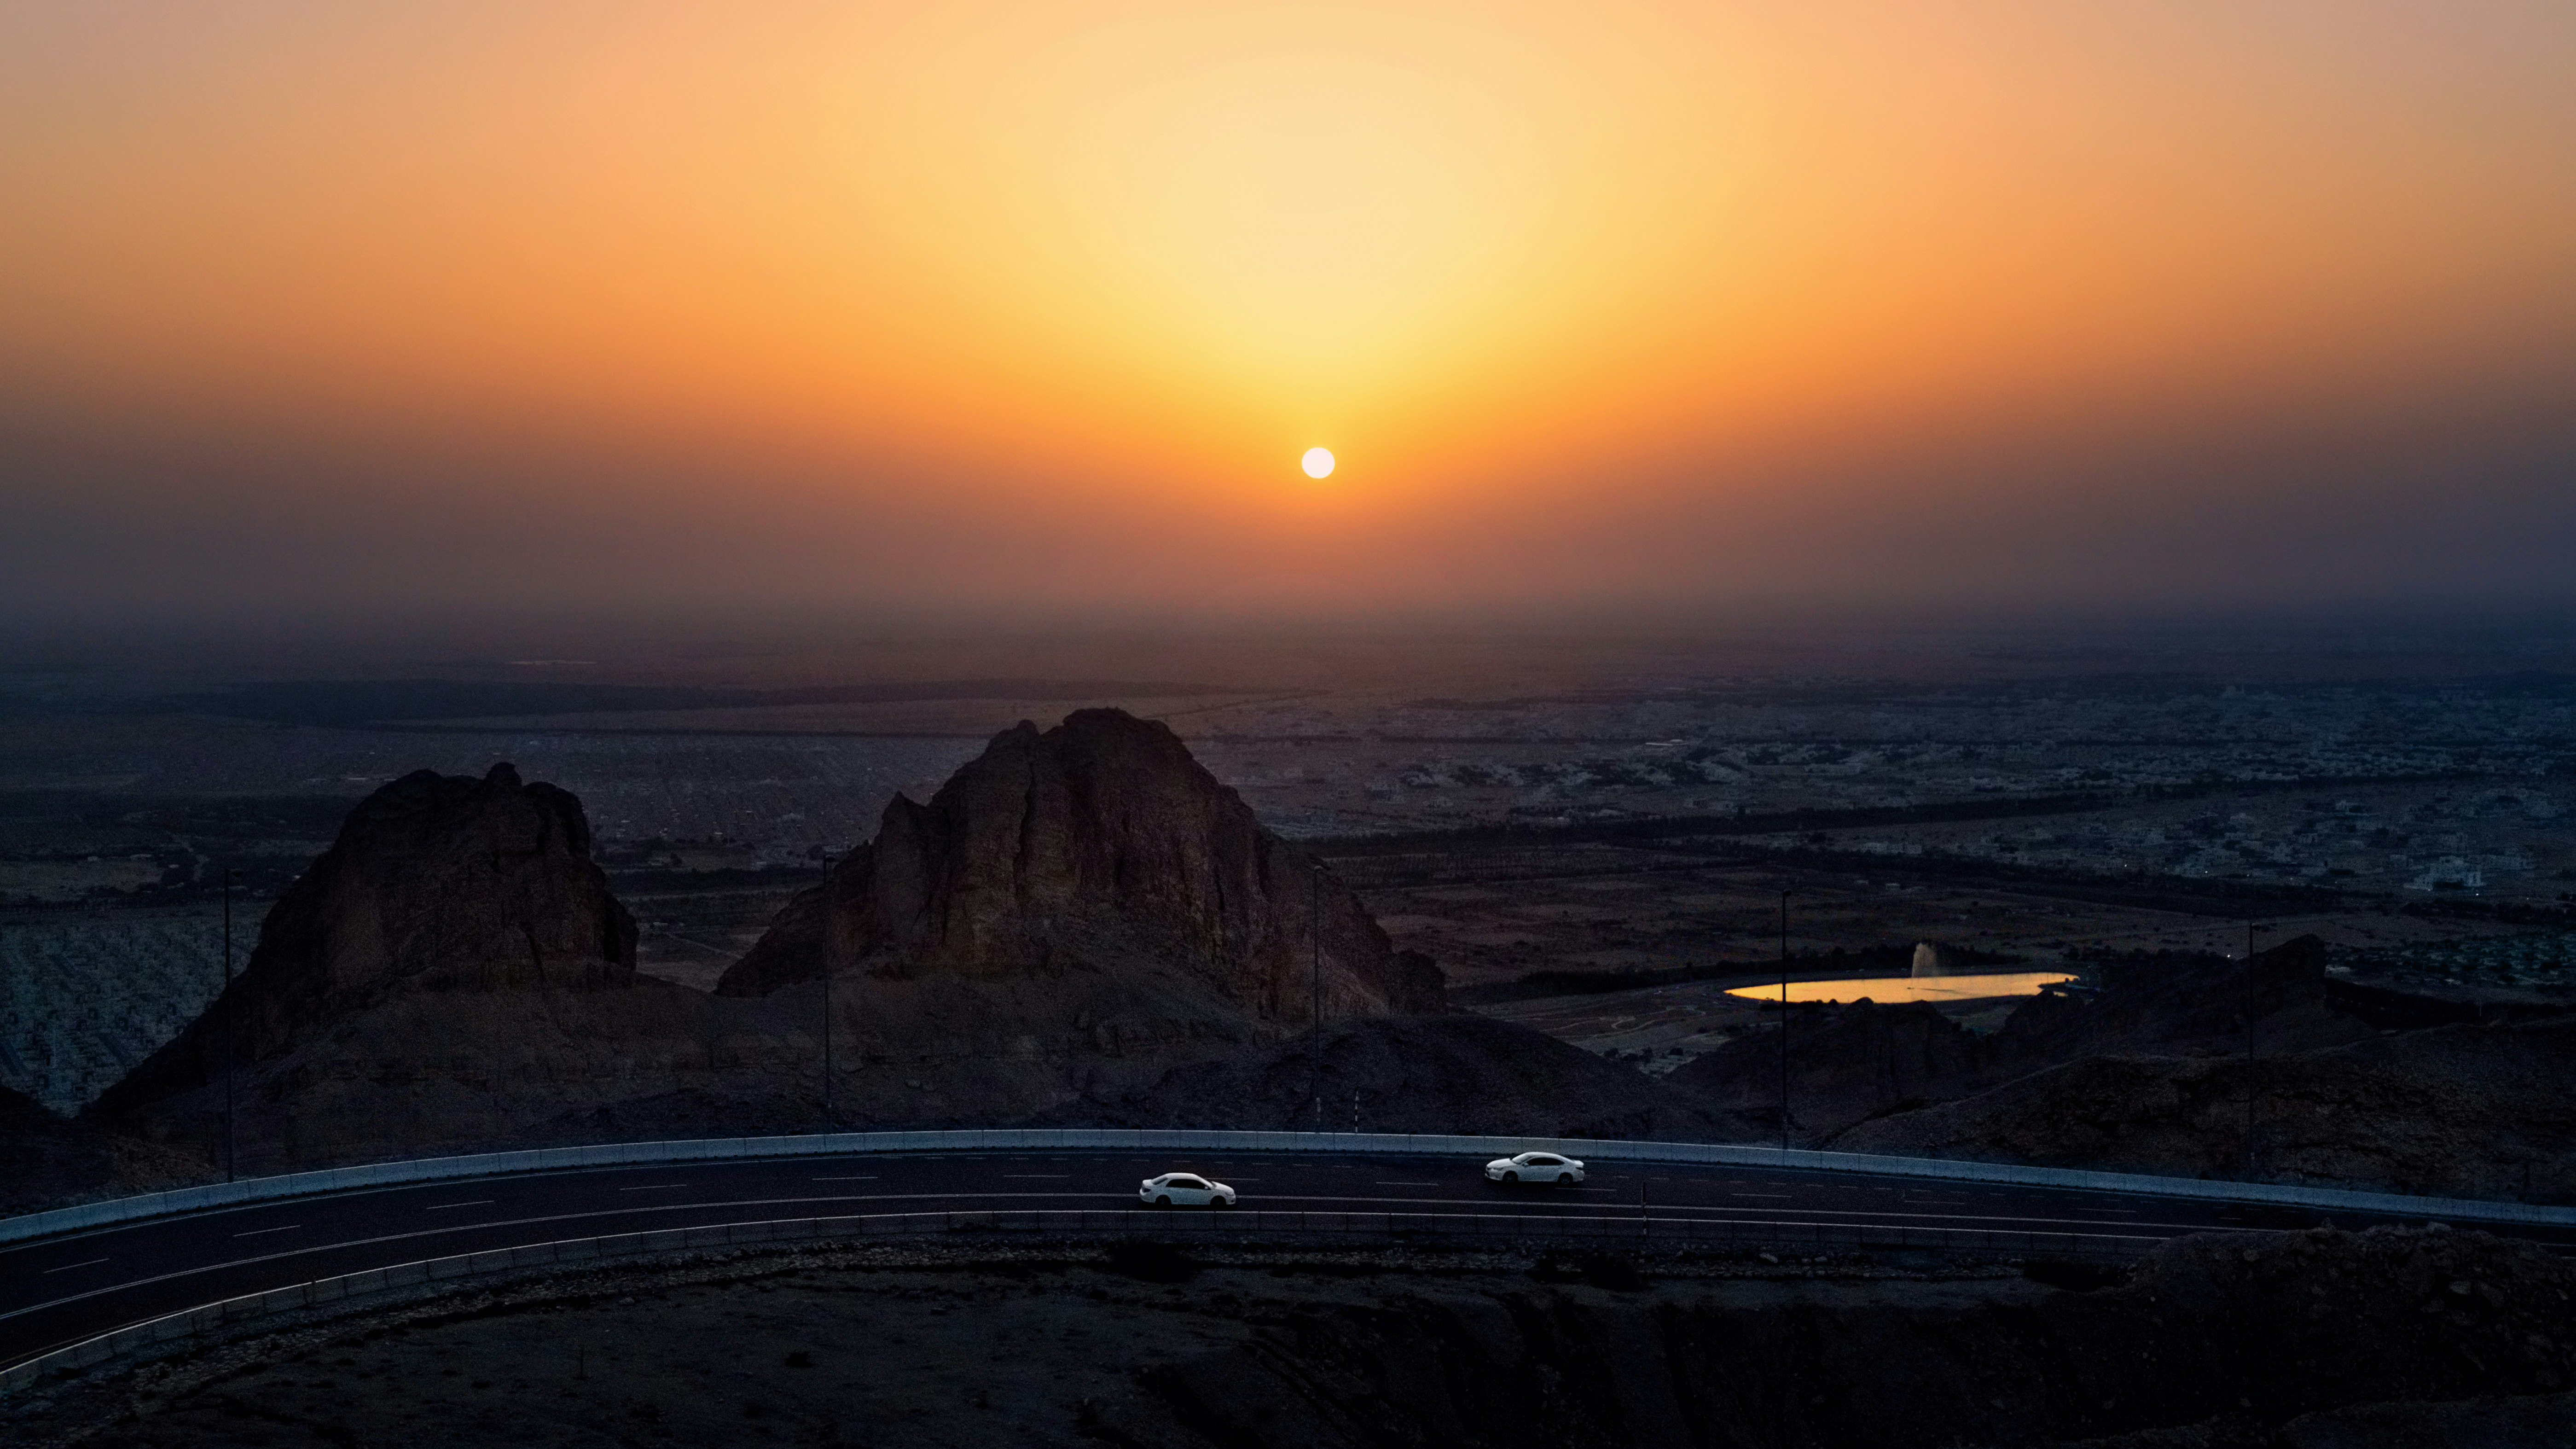 cars on road near mountains during sunset